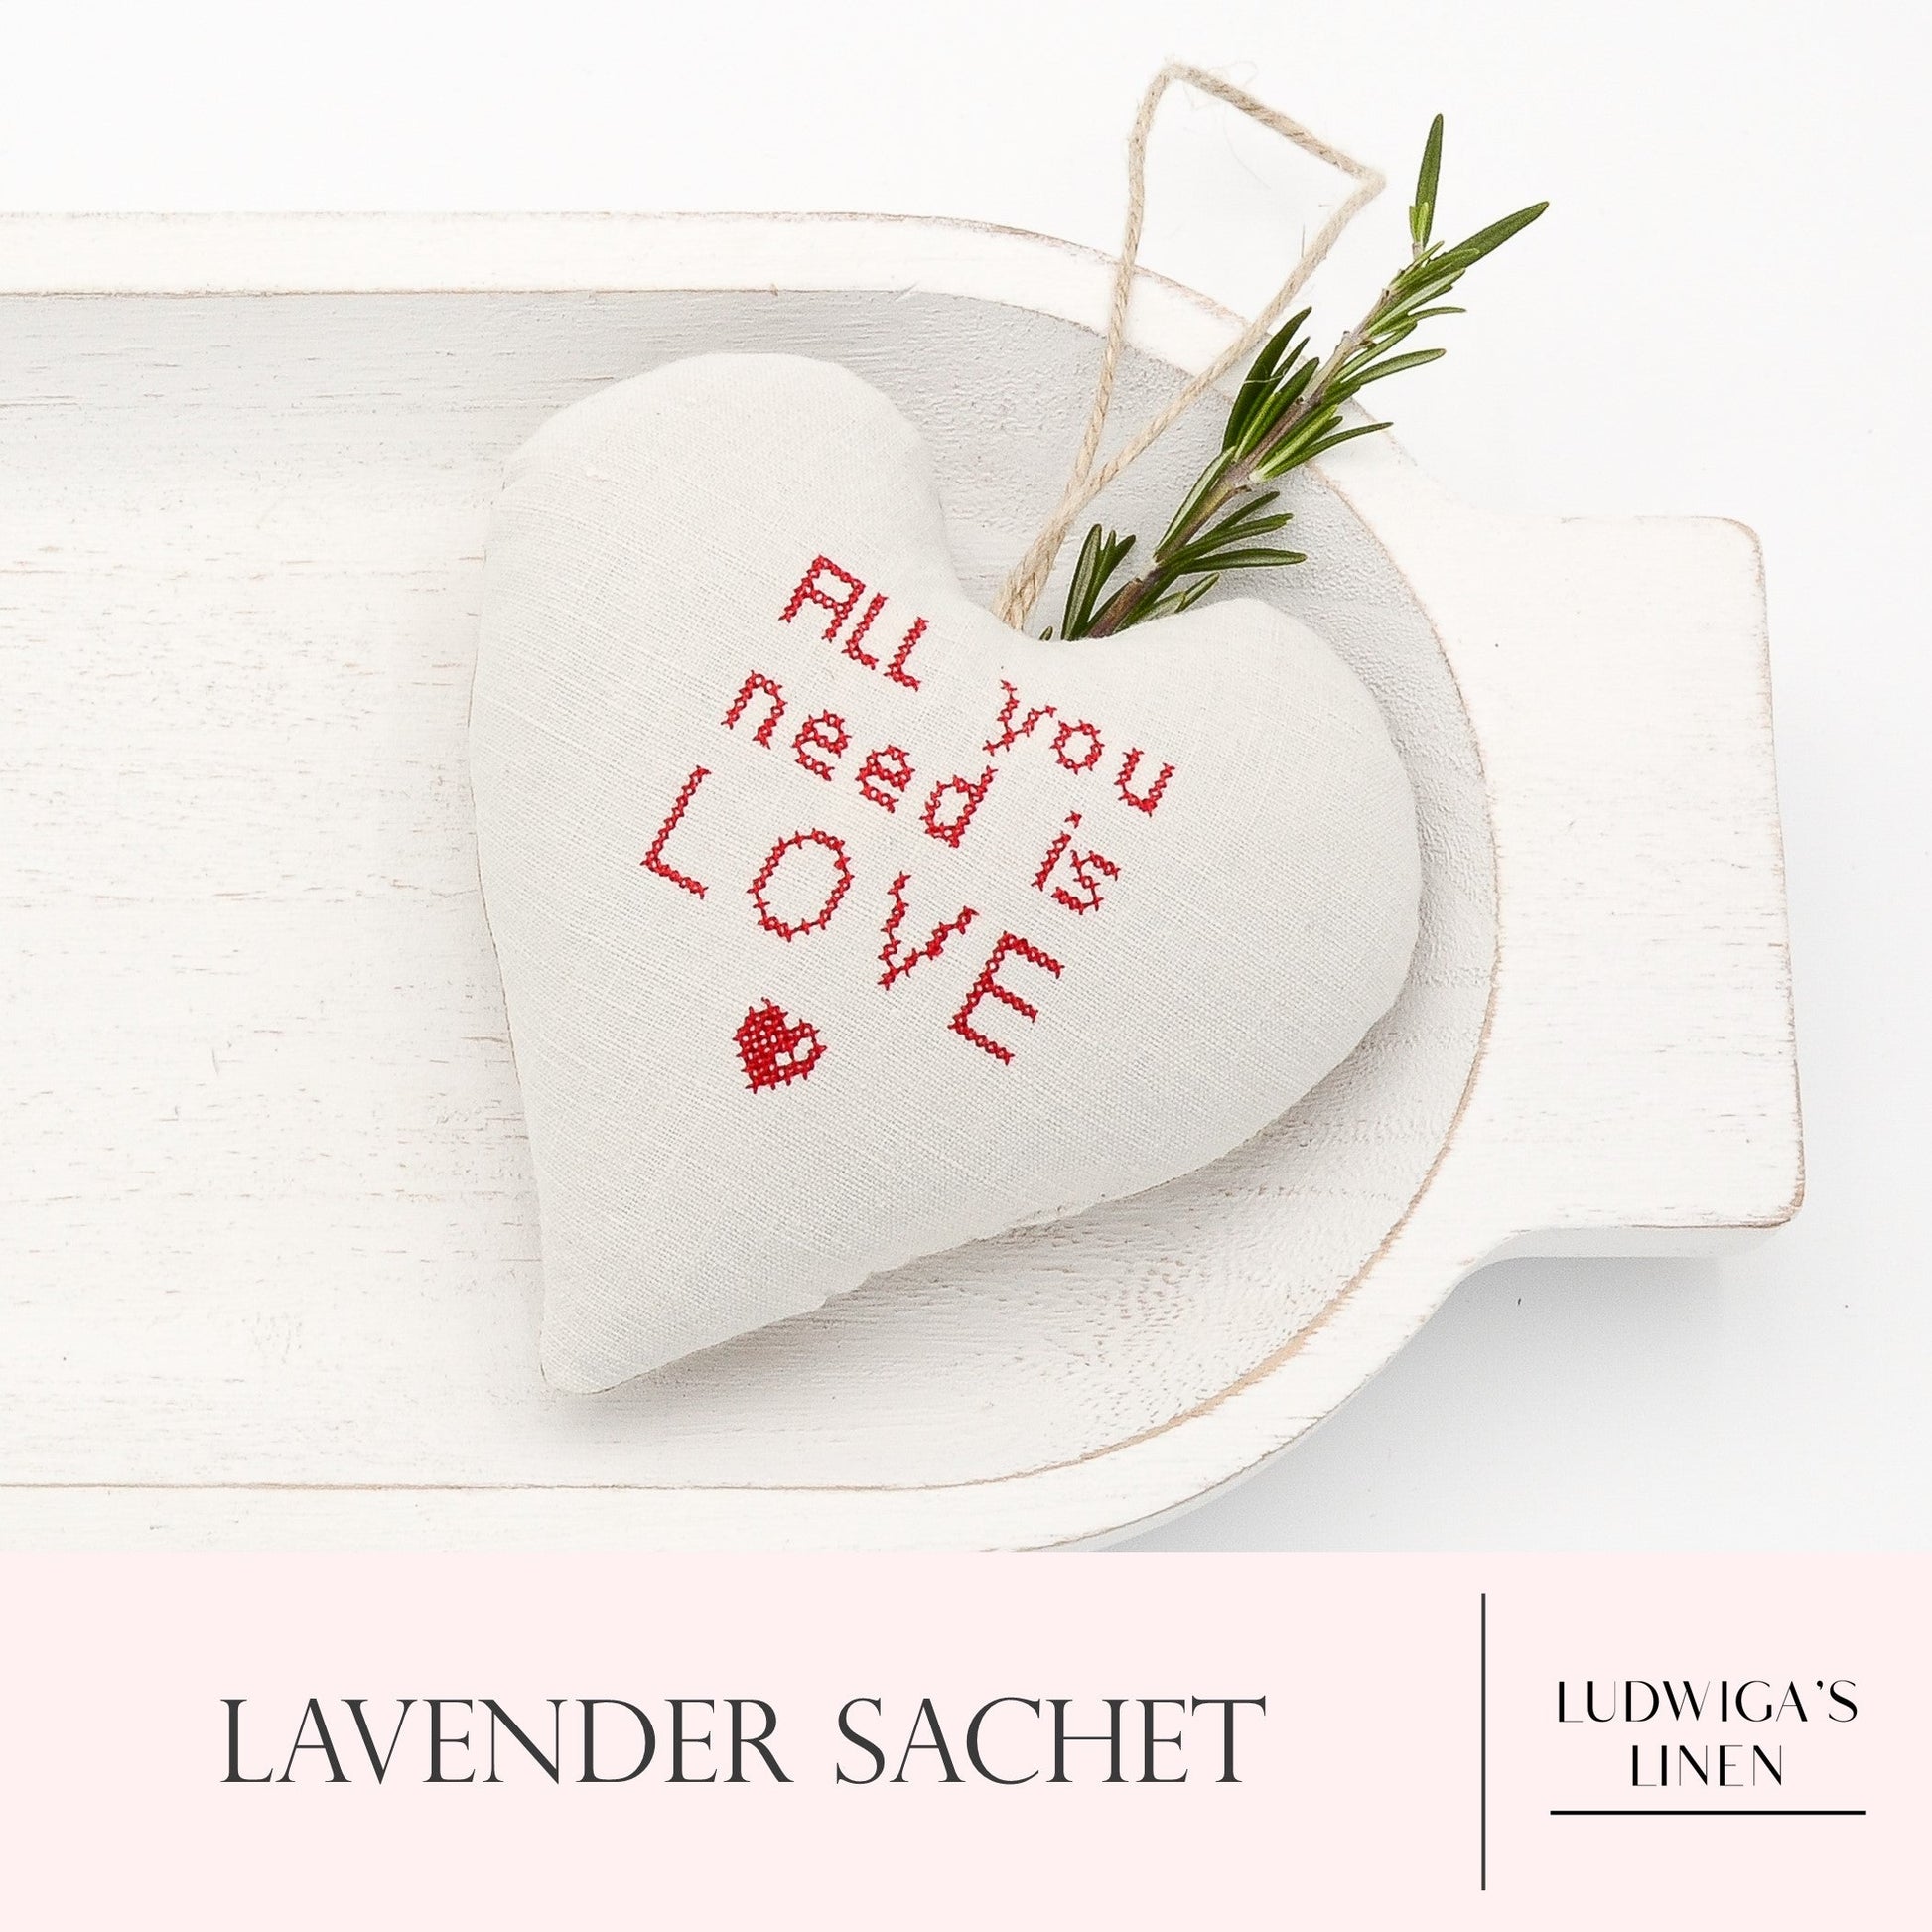 Antique/vintage European white linen lavender sachet heart with "all you need is love" embroidered in red, hemp twine tie and filled with high quality lavender from Provence France